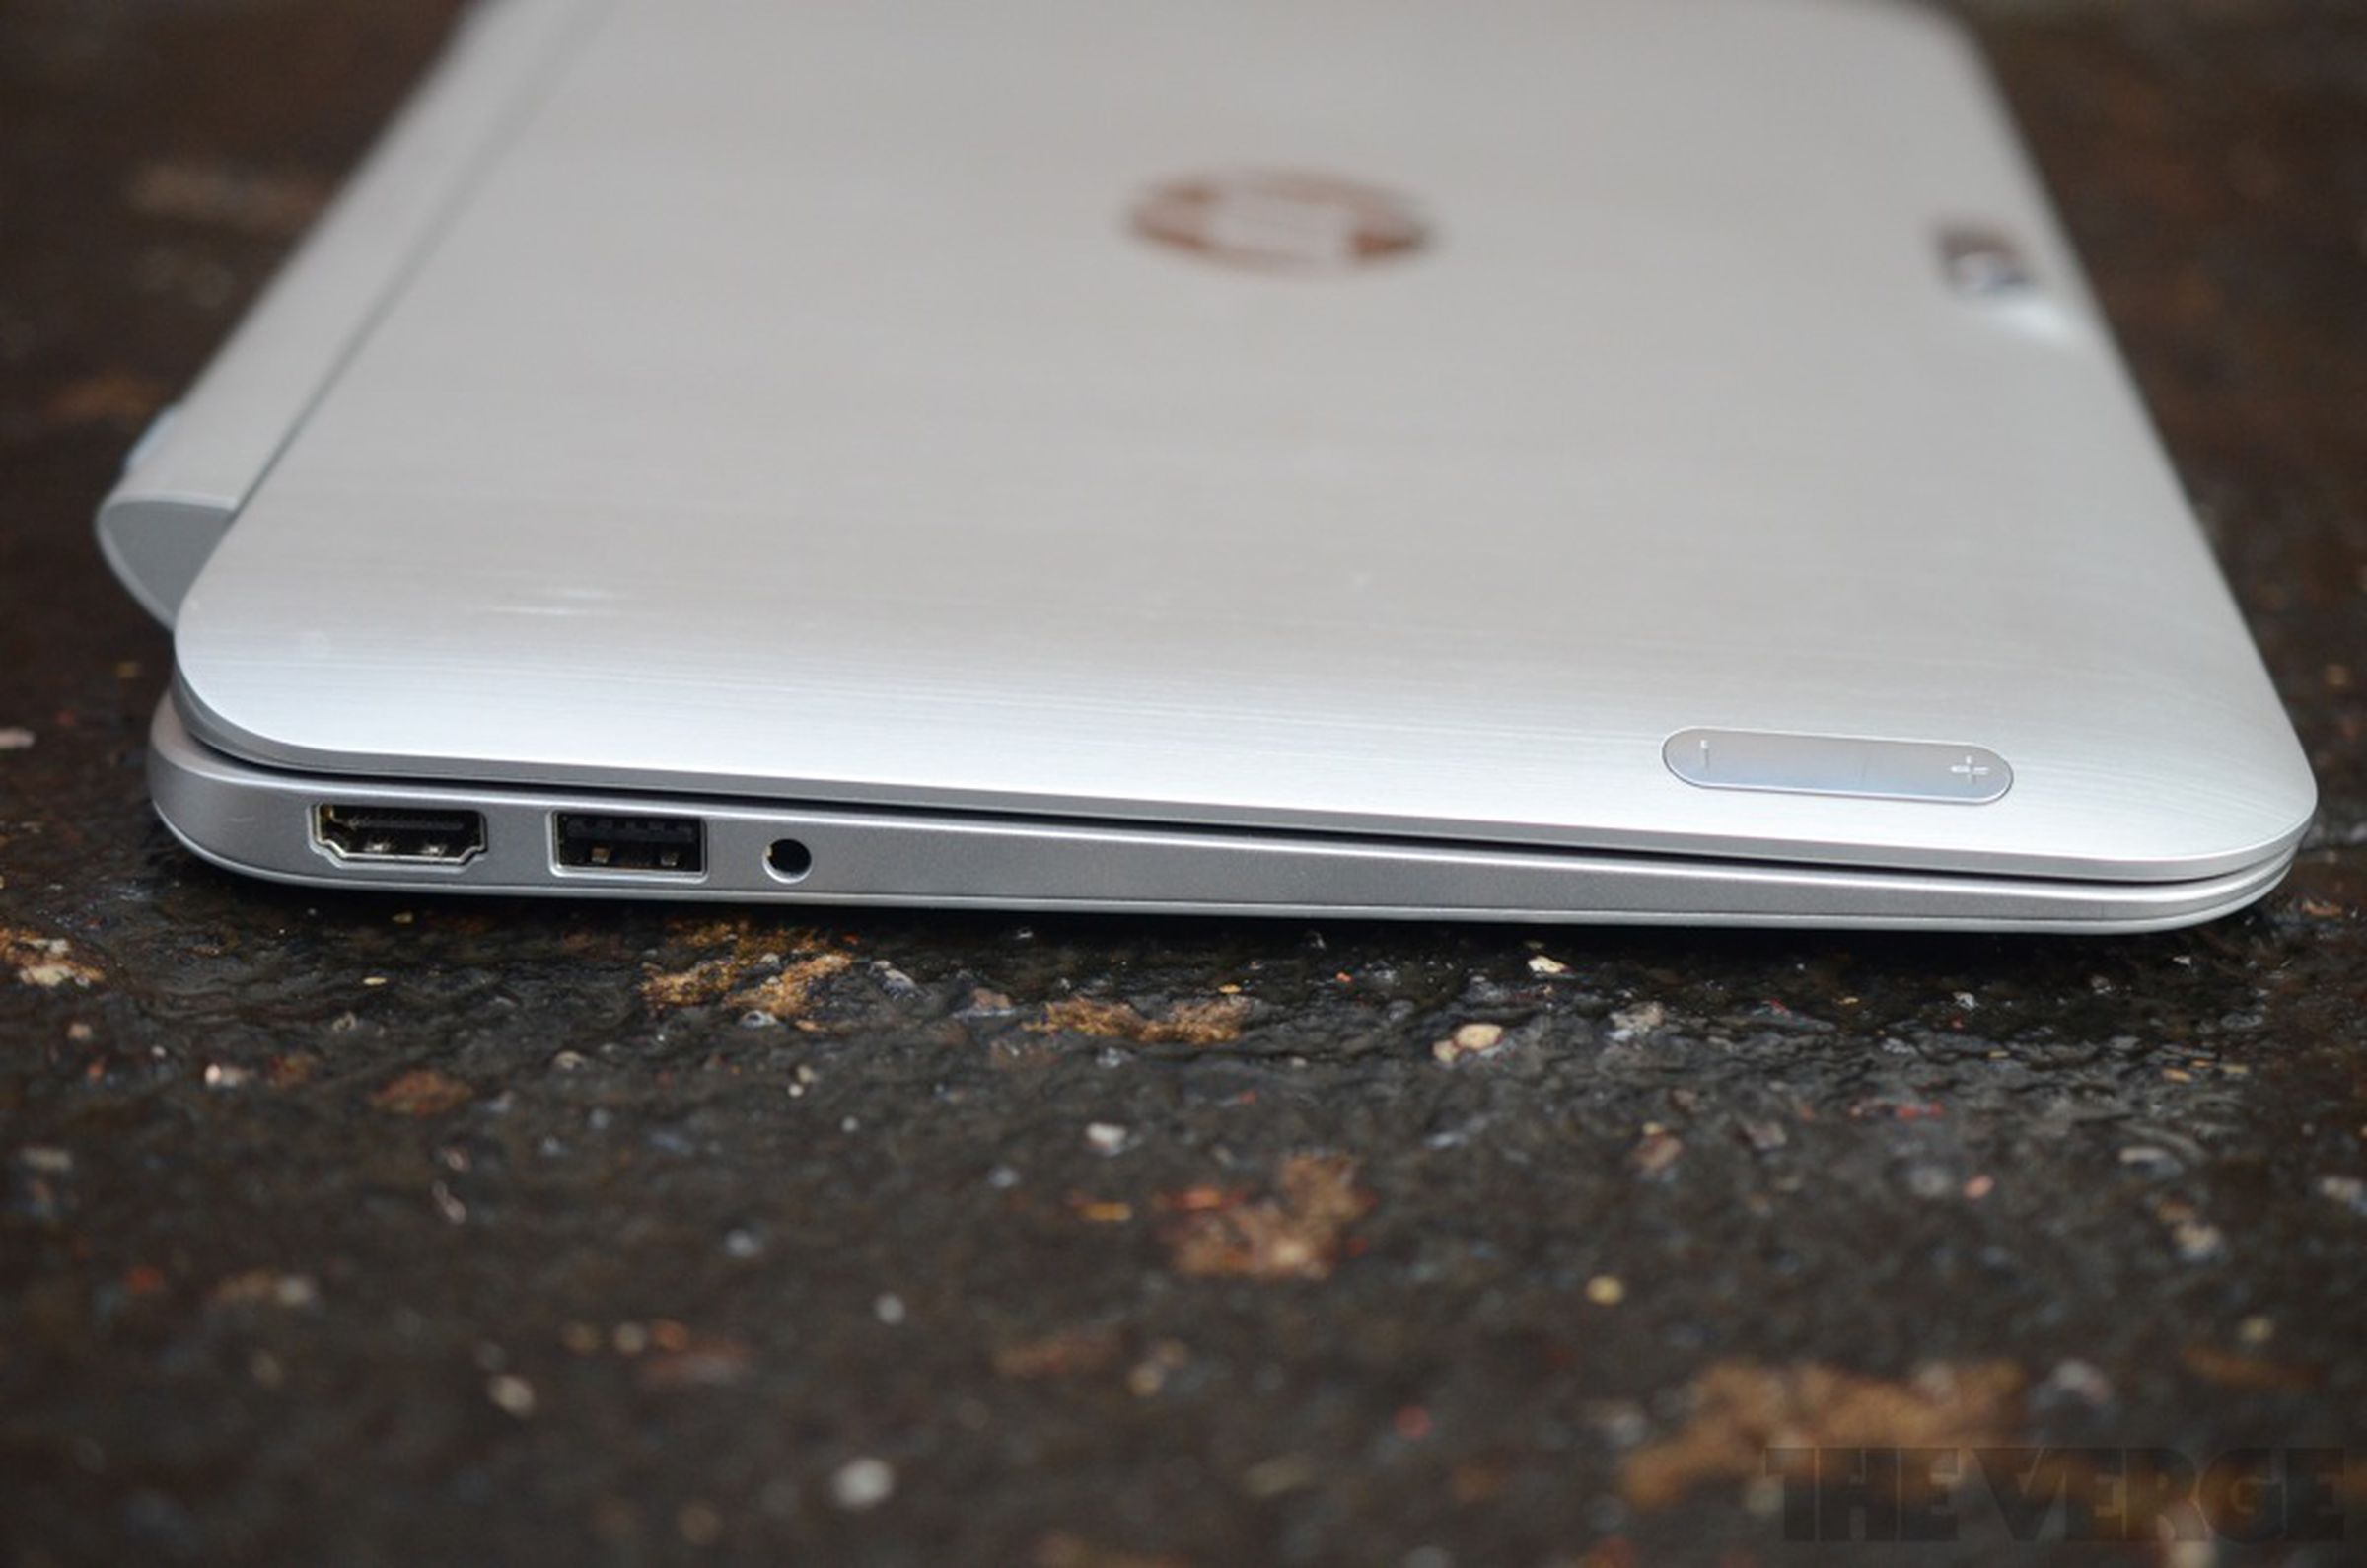 HP Envy x2 hands-on pictures